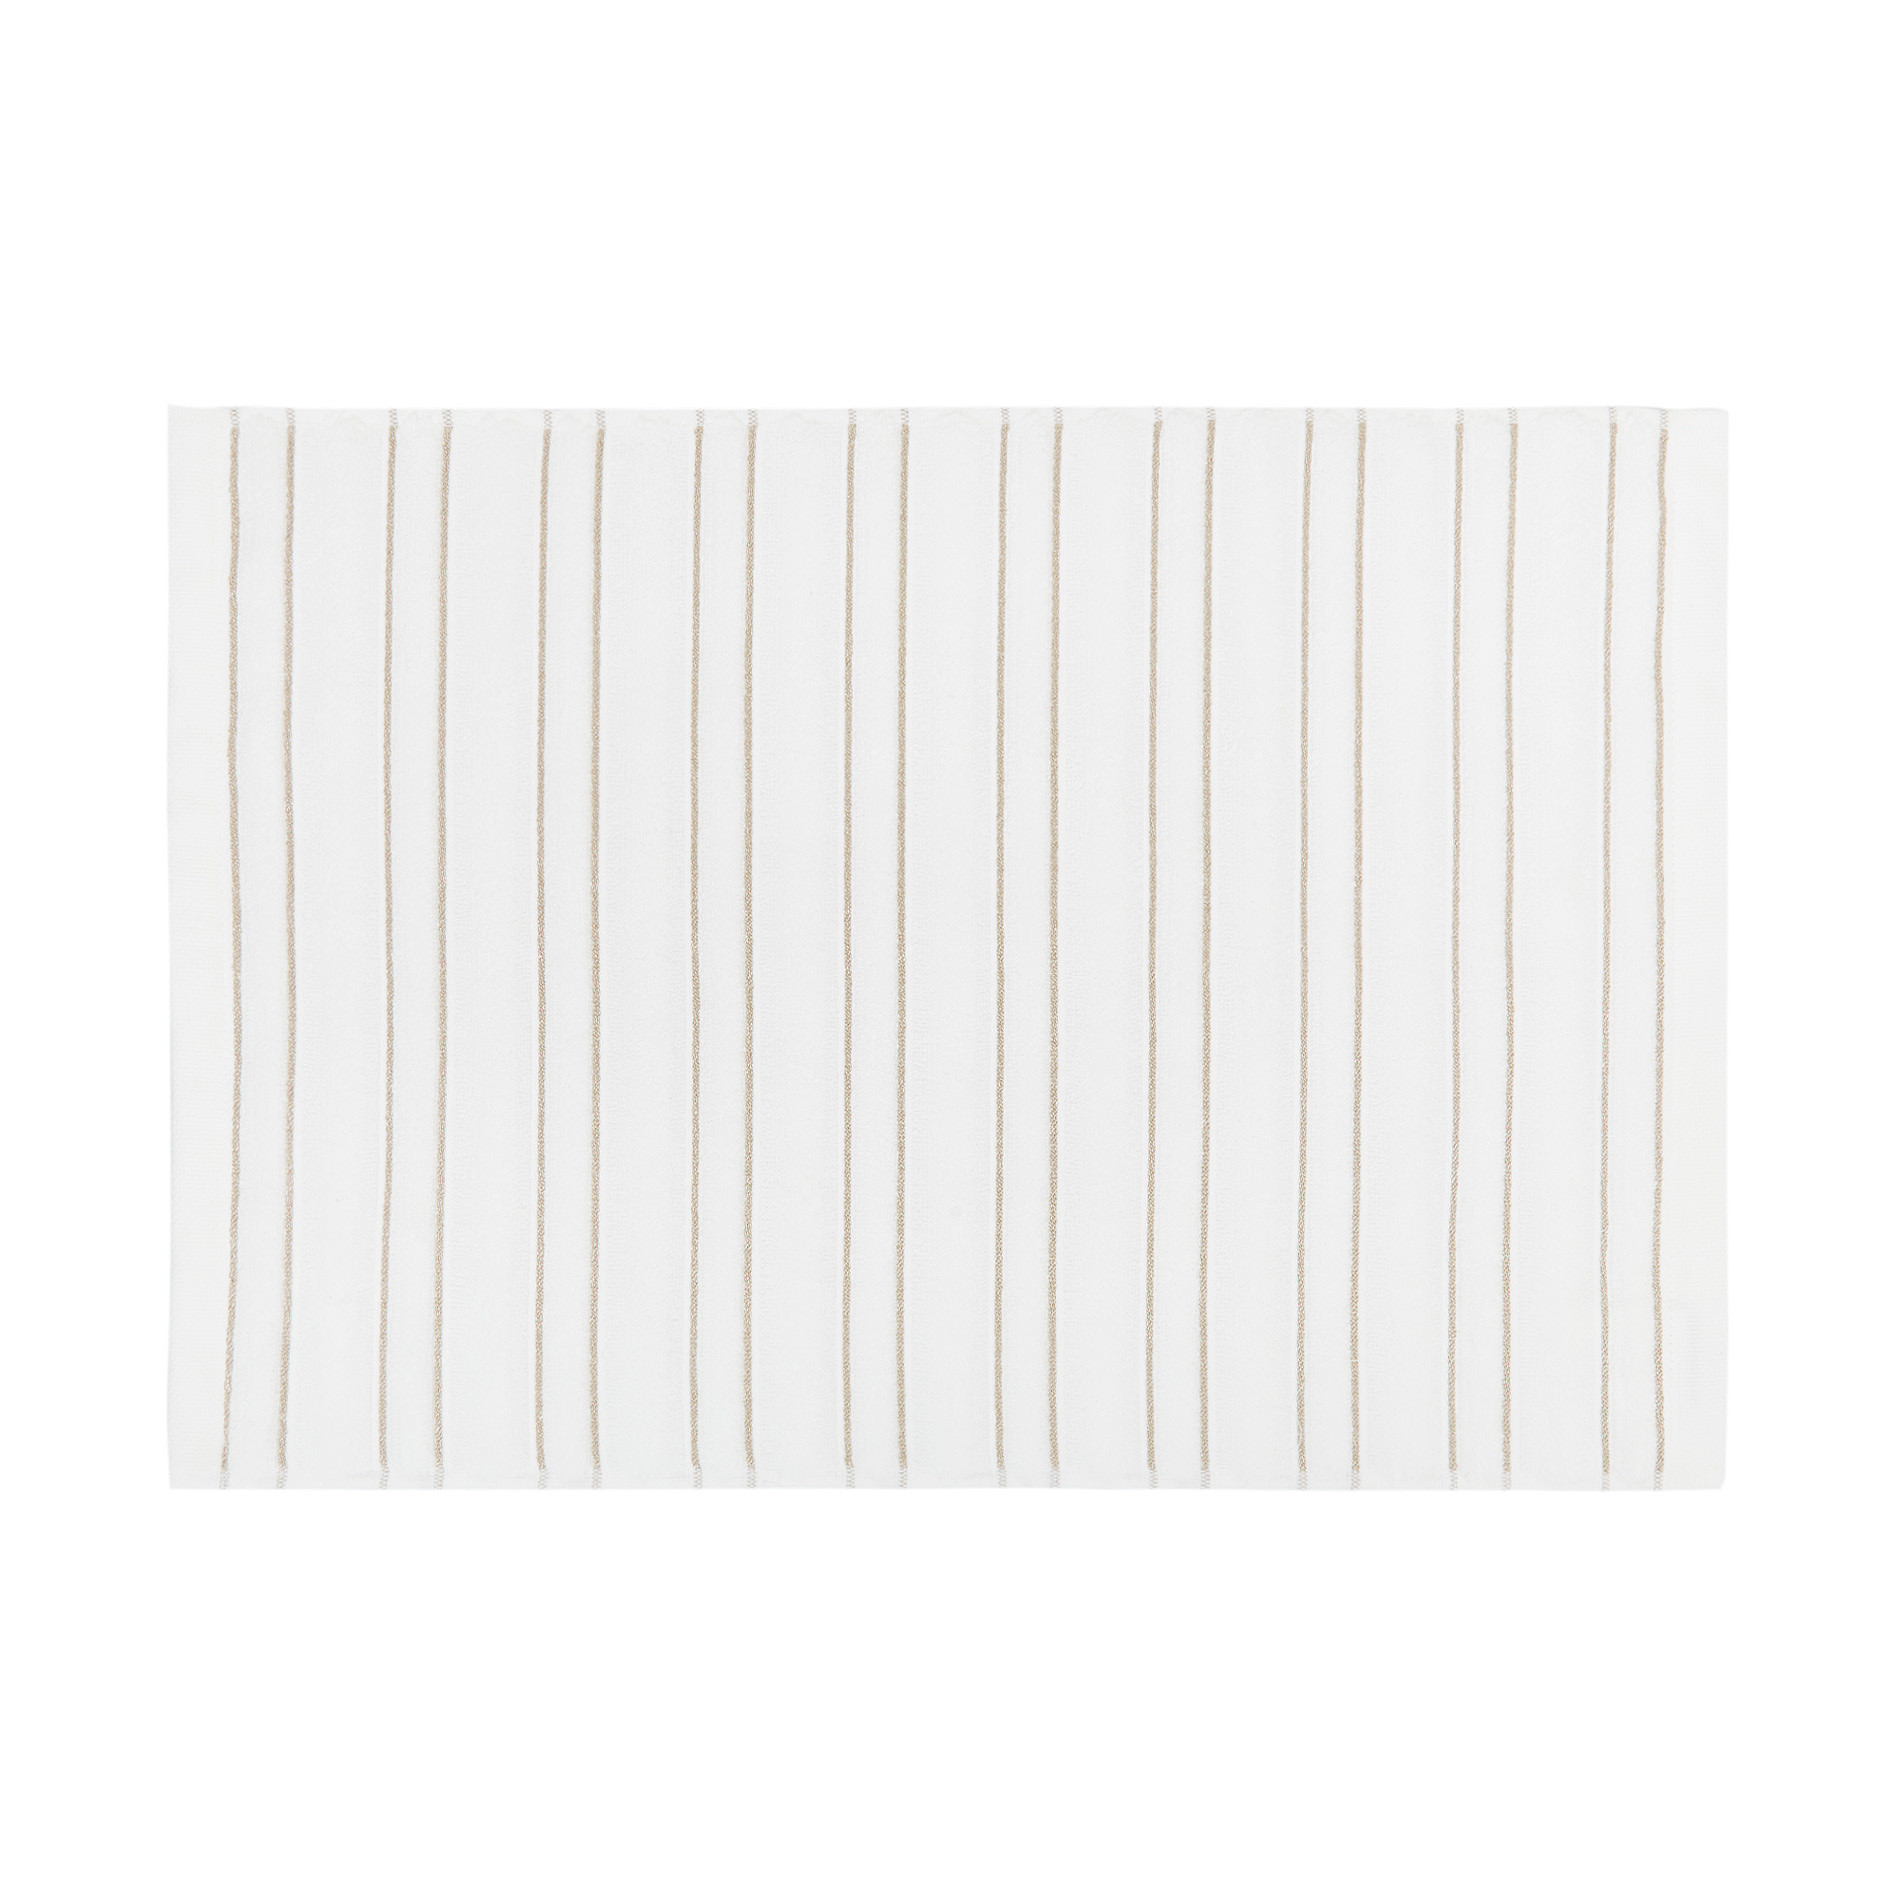 Portofino terry towel in striped pattern cotton, White, large image number 1